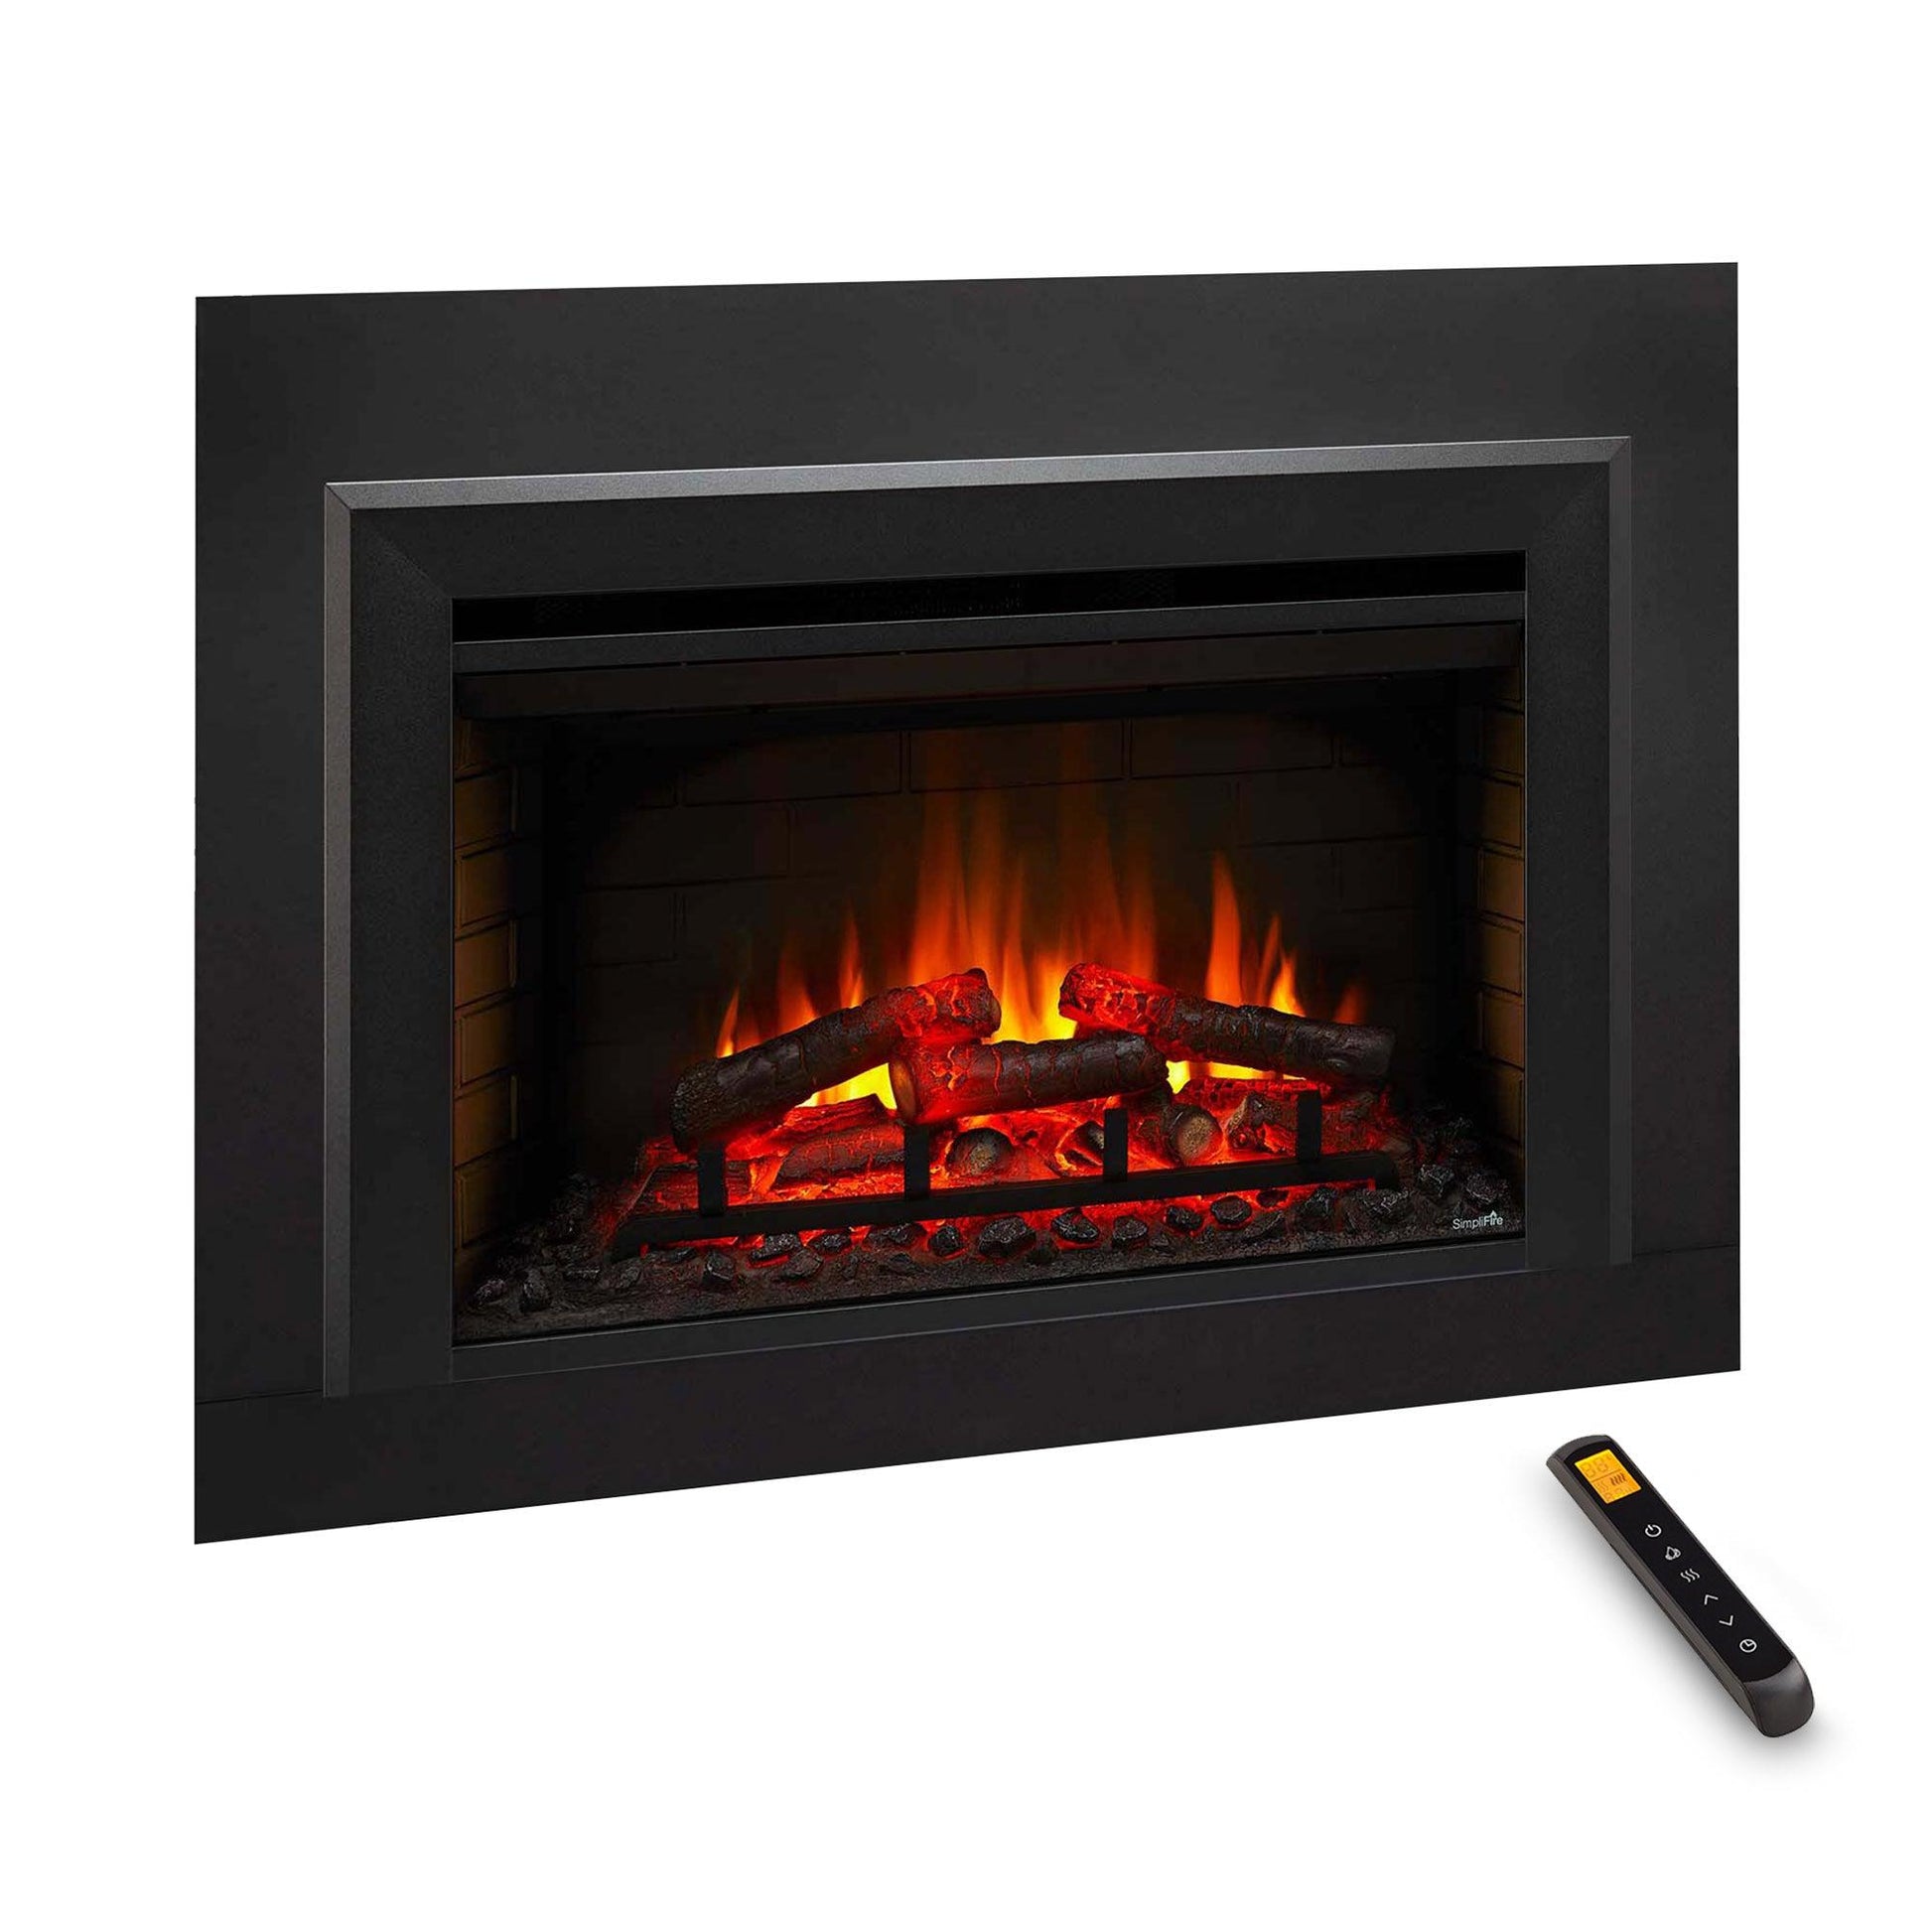 SimpliFire 30" Traditional Electric Built-In Fireplace Insert